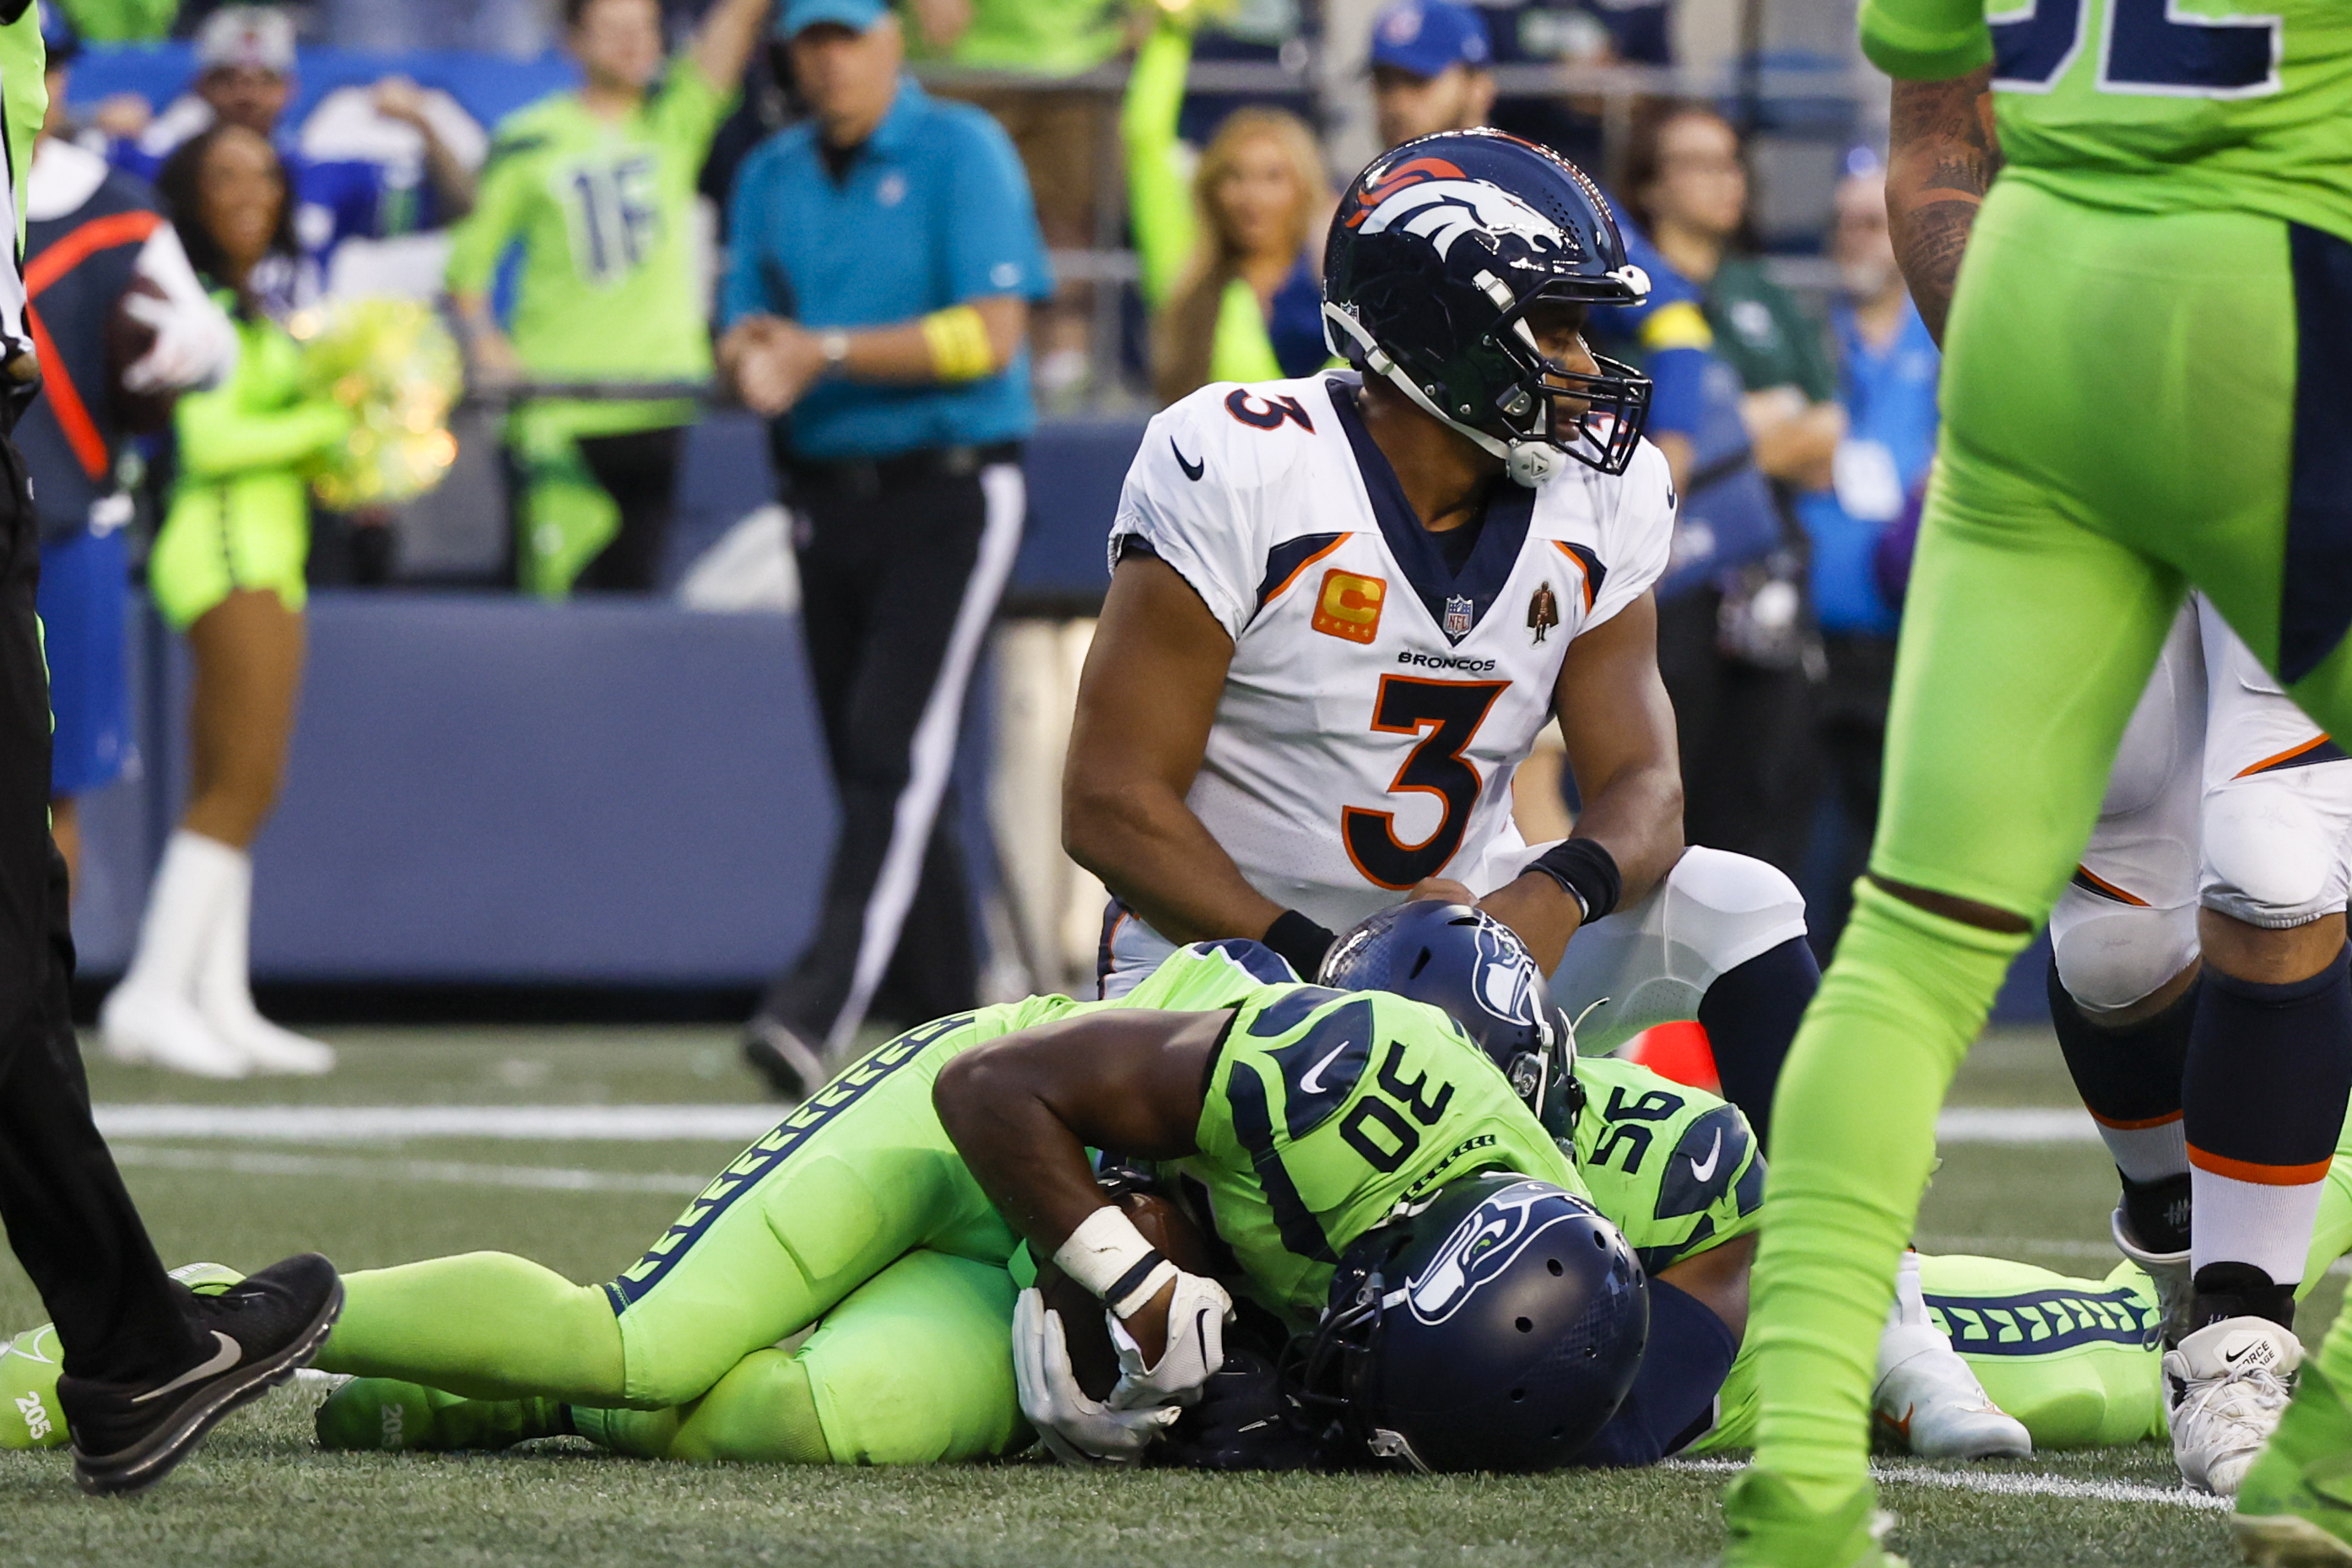 Seahawks Fans Boo Russell Wilson In Return To Seattle: ‘Uncalled For’ Says RG3